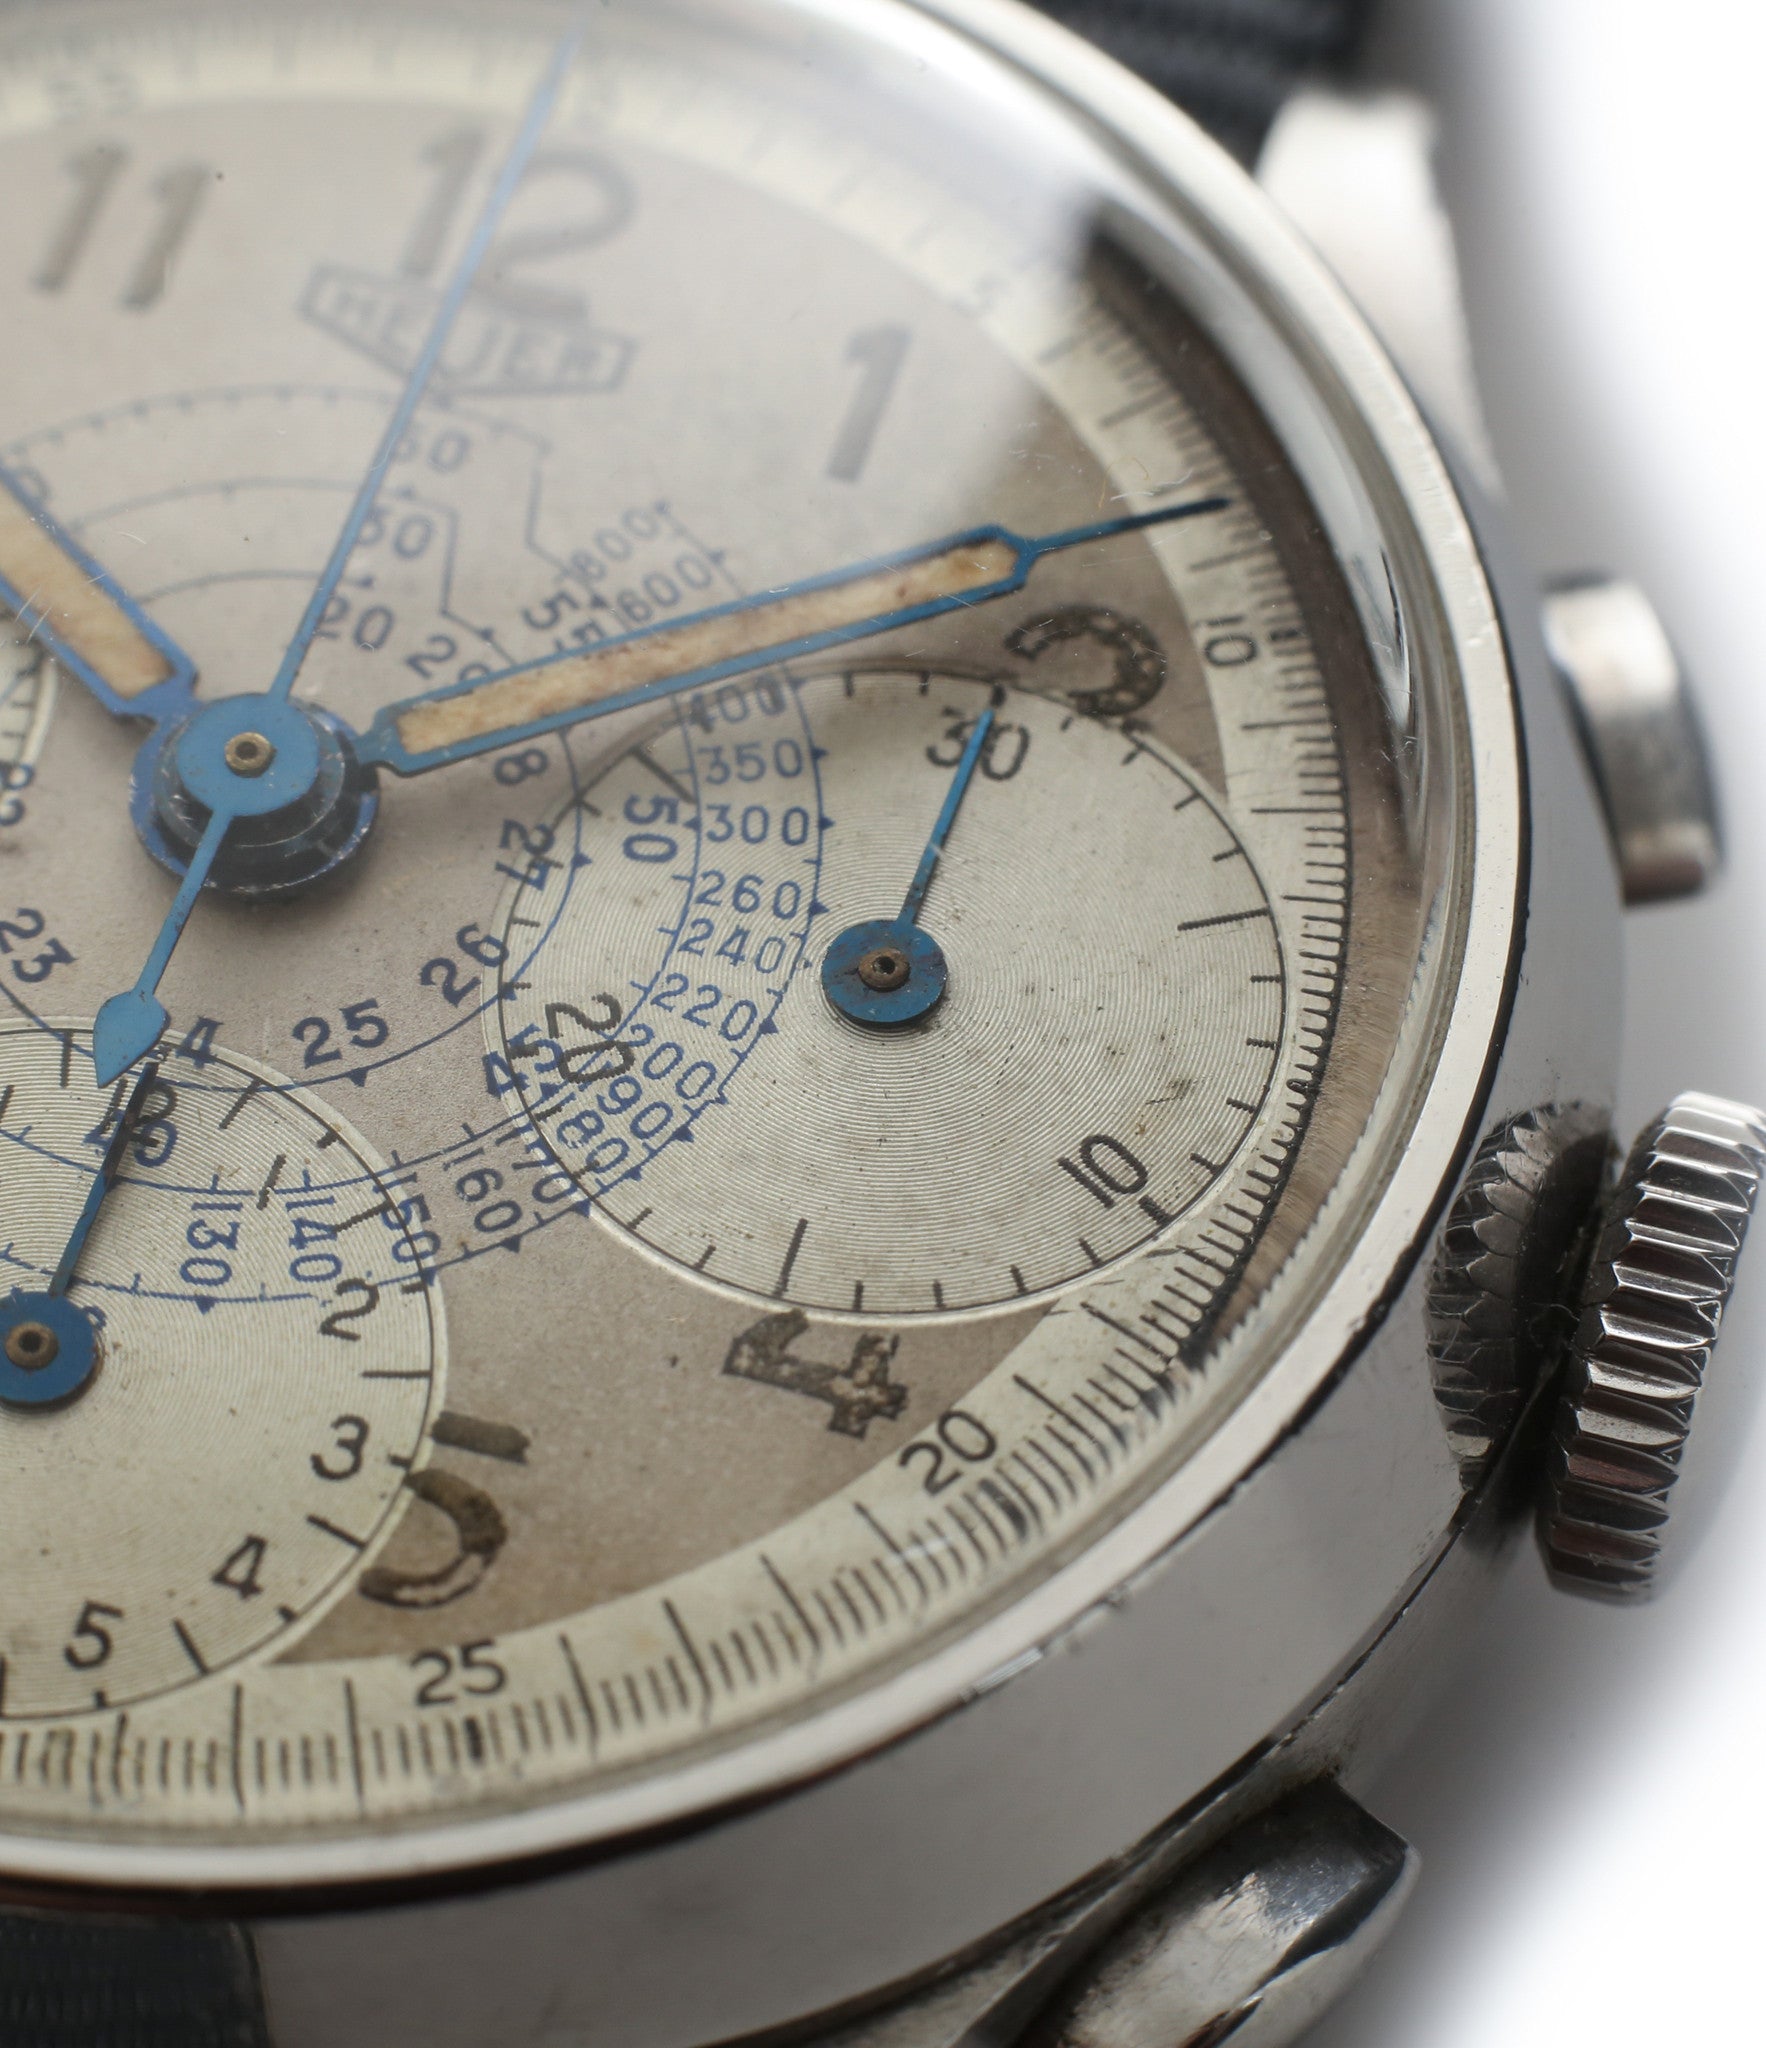 rare vintage Heuer Chronograph steel watch for sale online at A Collected Man London